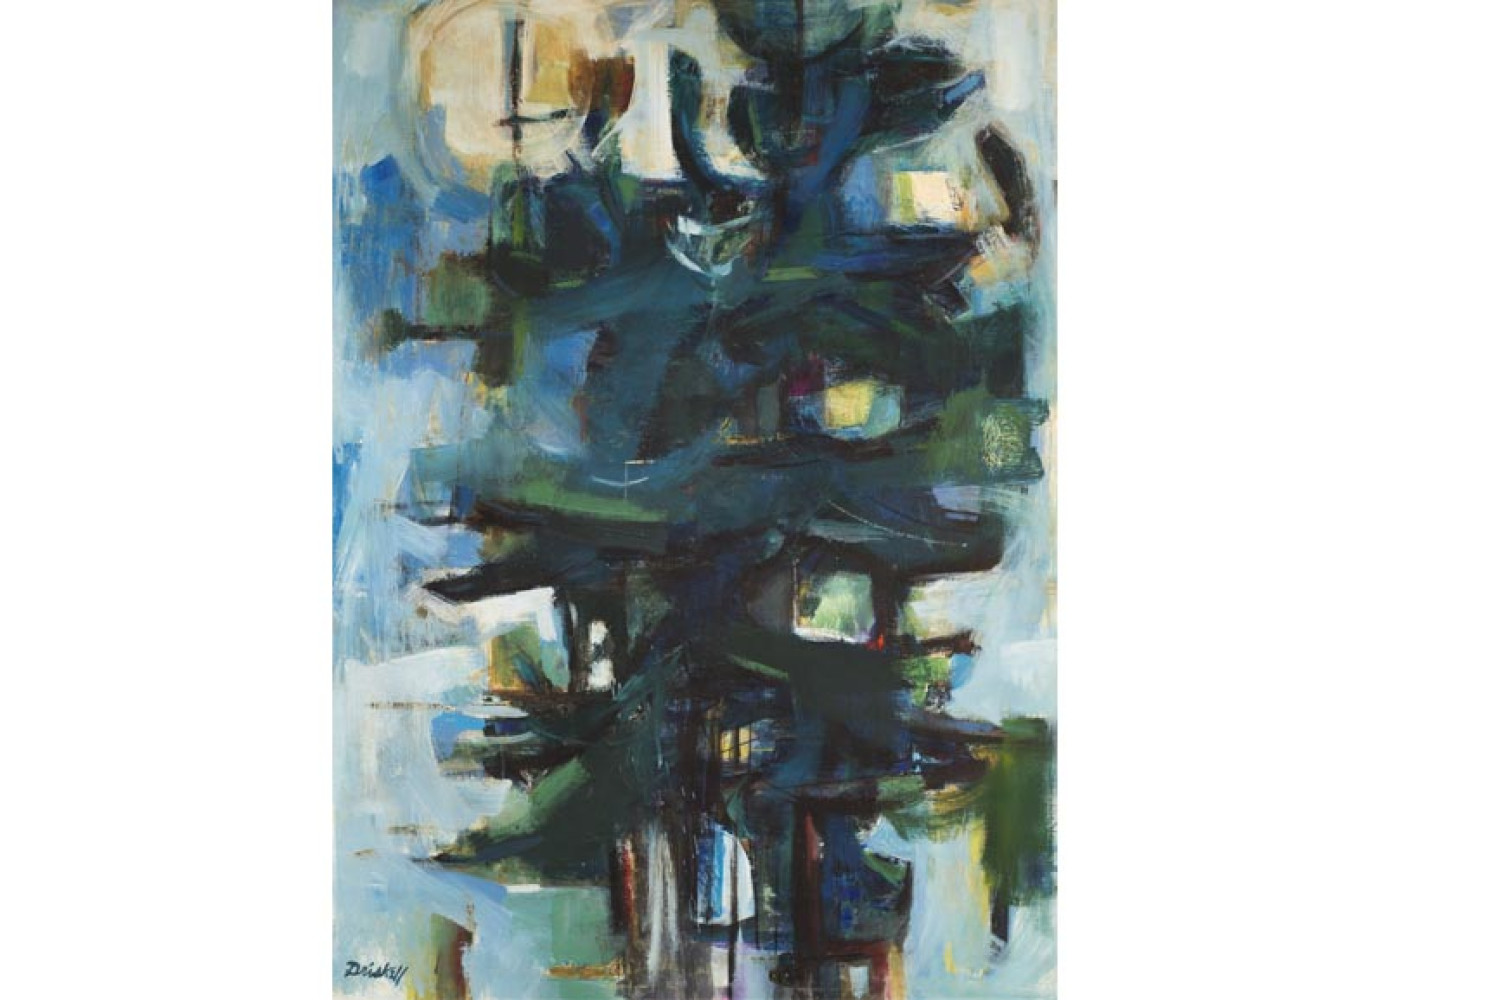 Pine Trees, 1961, By David Driskell (American, b. 1931); Oil and encaustic on canvas; Gift of Louis K. Rimrodt; 2018.002.0001
